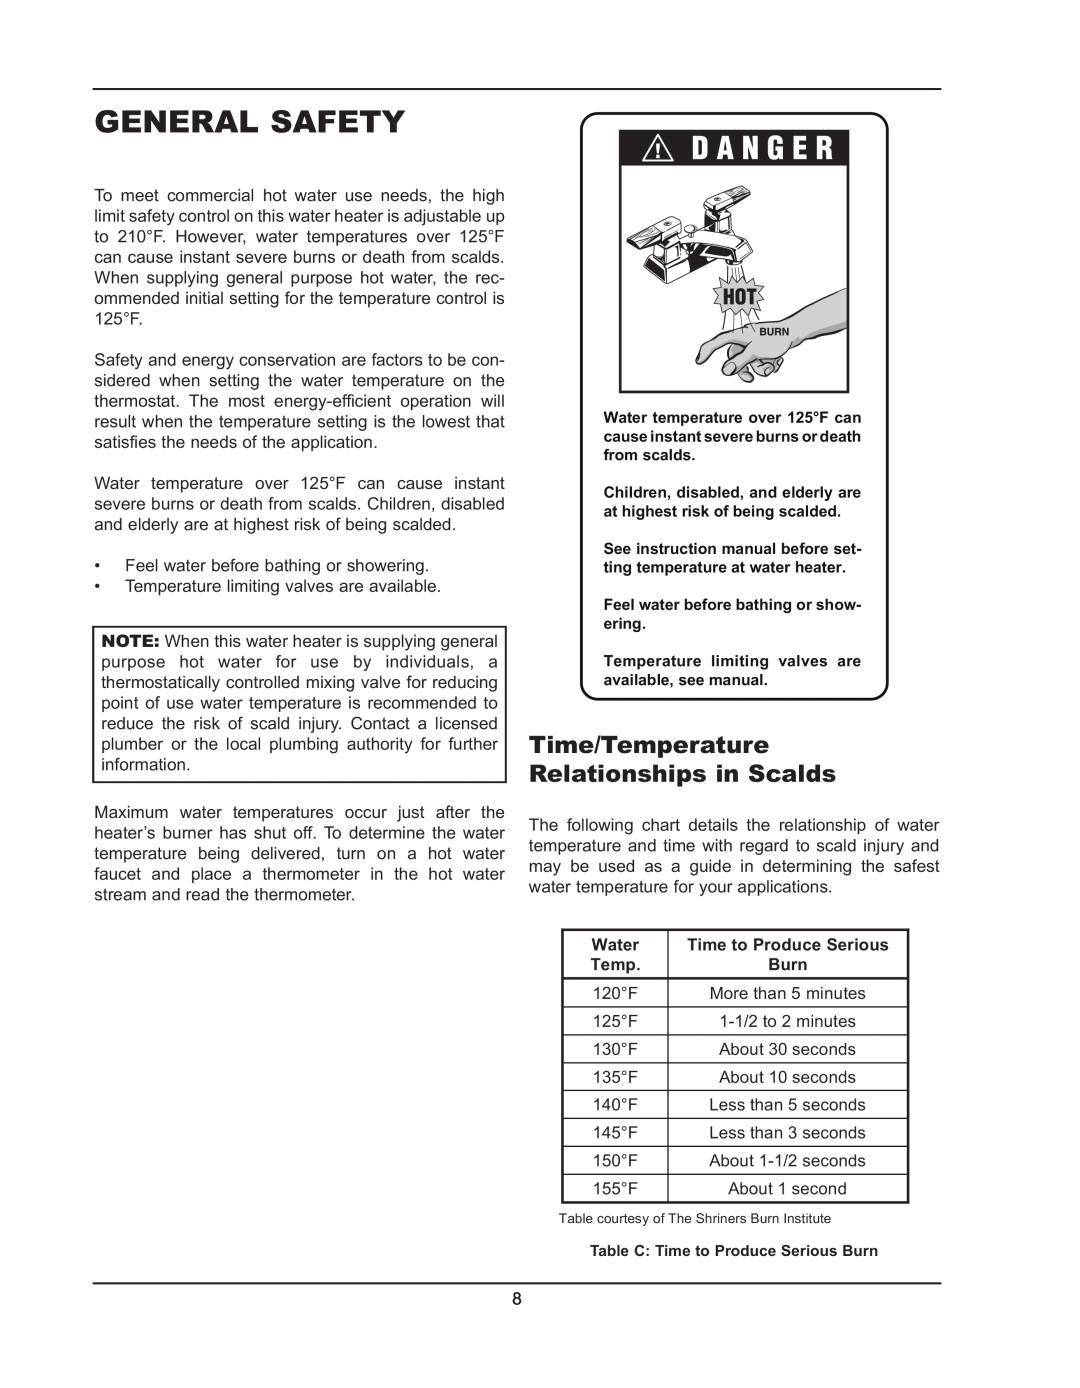 Raypak 992B manual General Safety, Time/Temperature Relationships in Scalds 